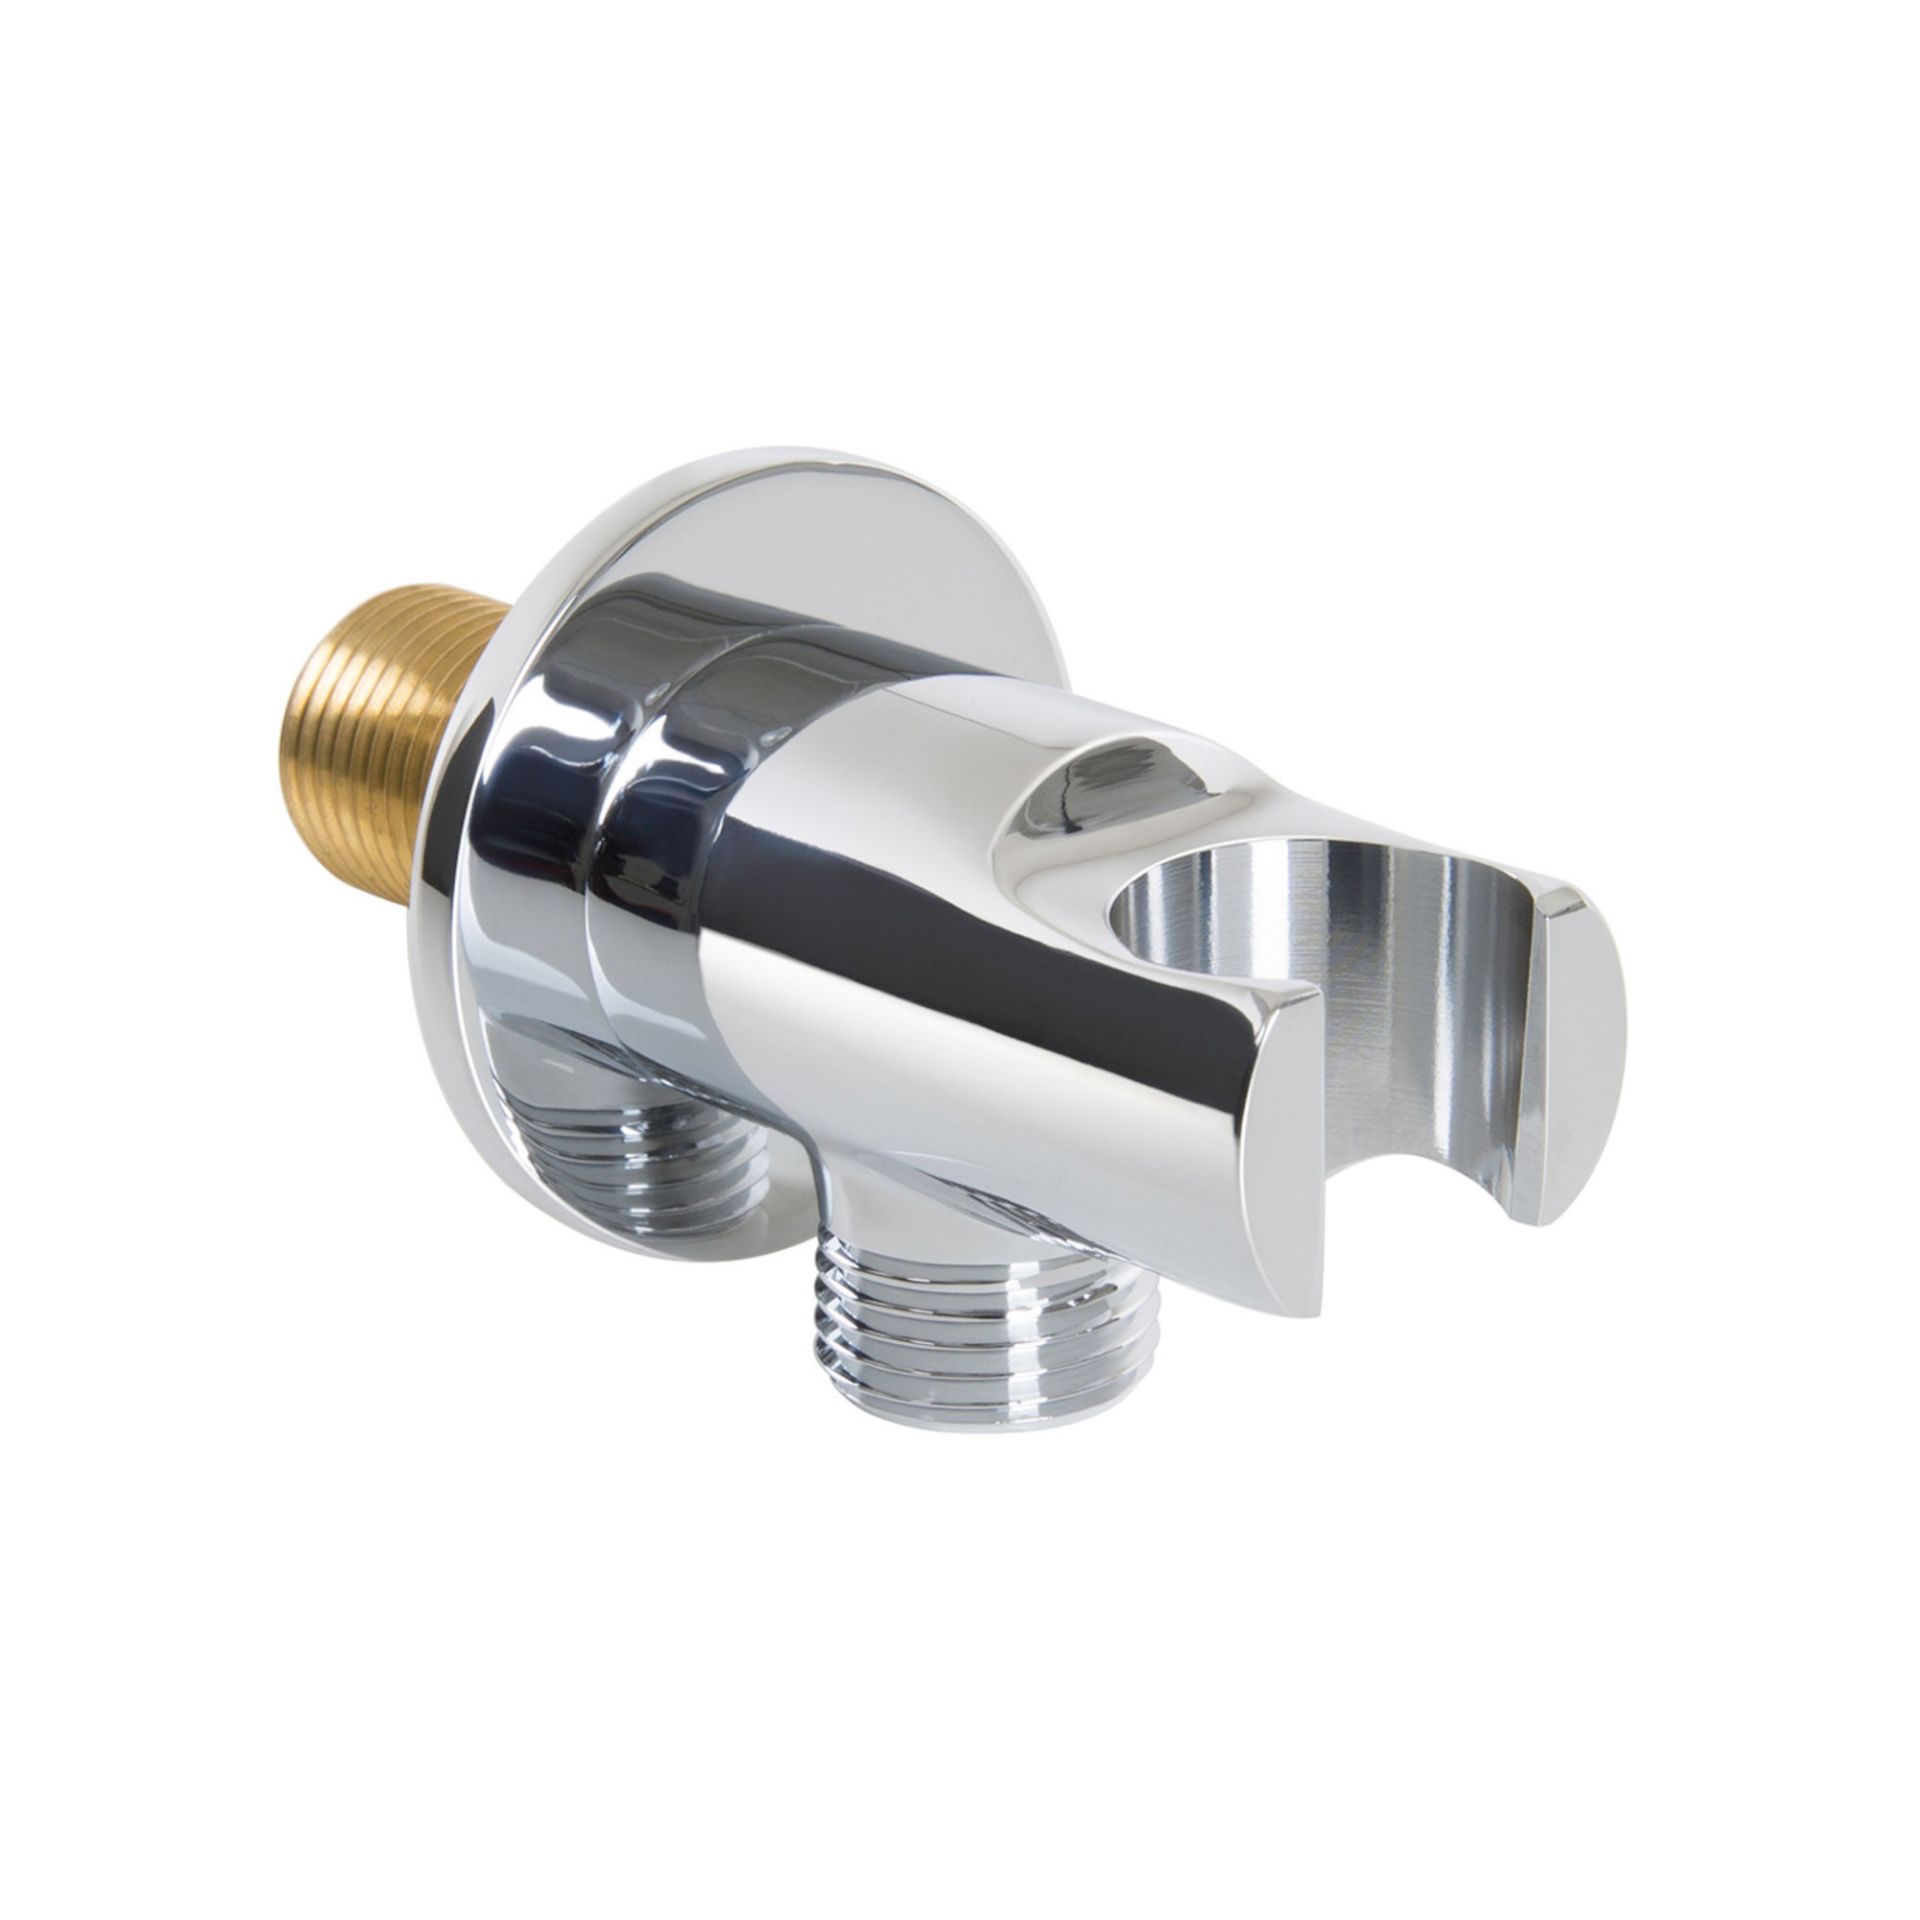 (NV1016) 15mm Standard Connection Straight Gloss White Radiator Valves Solid brass construct ... - Image 2 of 2